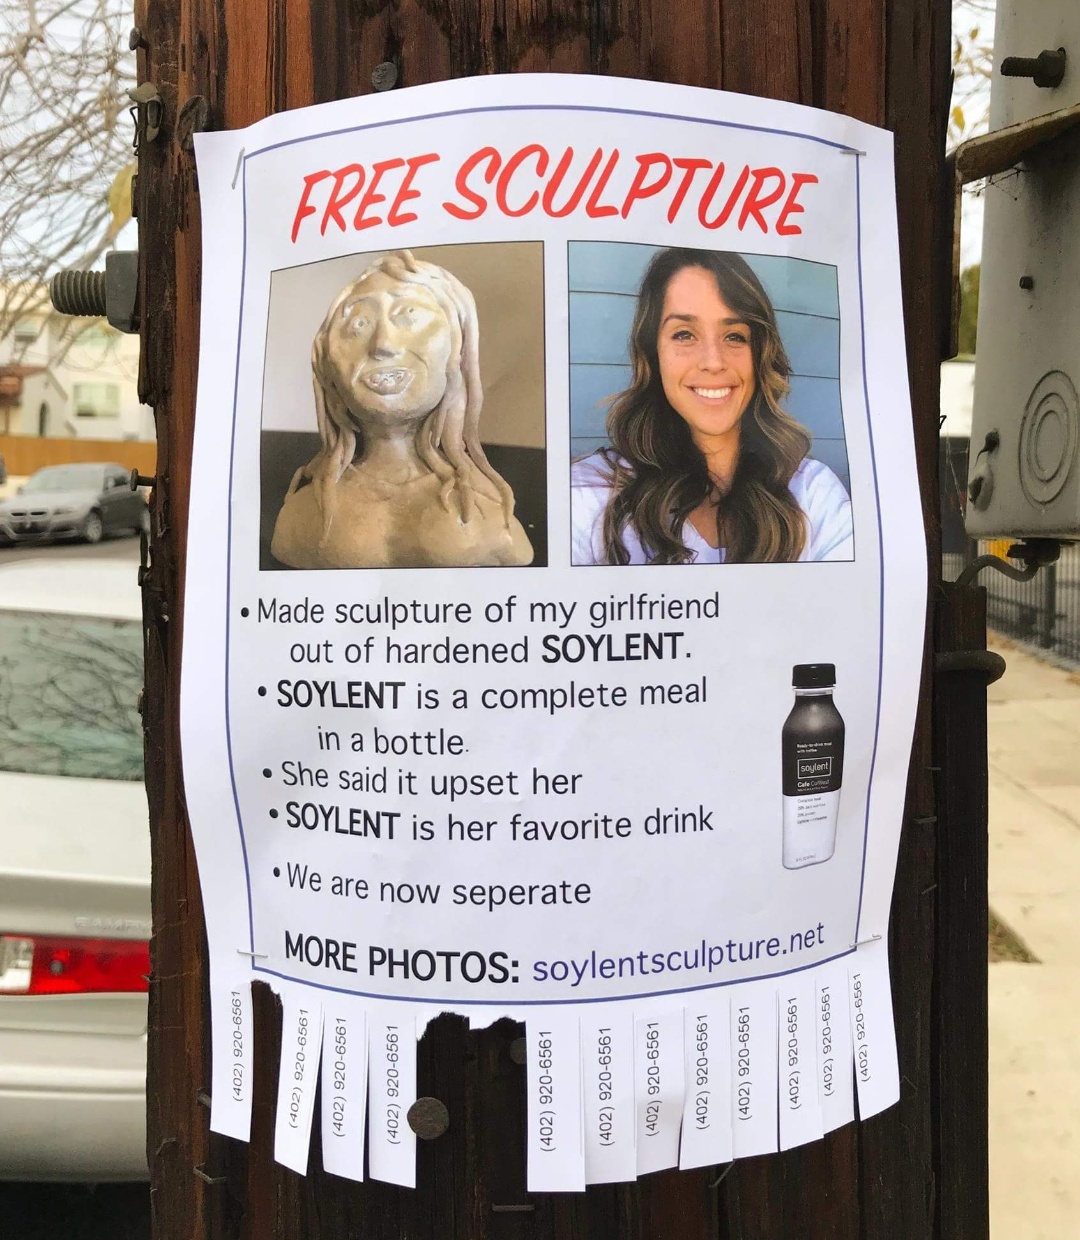 alan wagner posters - Free Sculpture Made sculpture of my girlfriend out of hardened Soylent. Soylent is a complete meal in a bottle She said it upset her Soylent is her favorite drink "We are now seperate More Photos soylentsculptu 402 9206561 zs 120